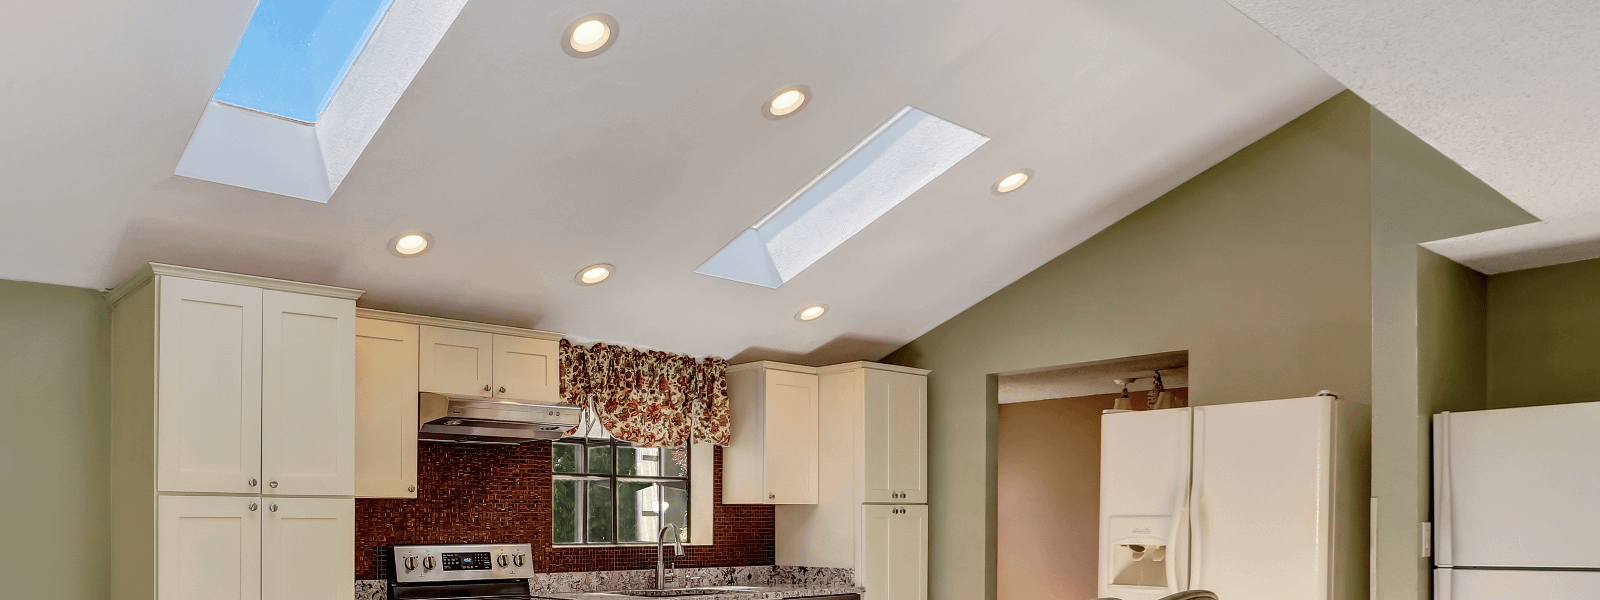 Two skylights shown above a white and green kitchen with red splashback.